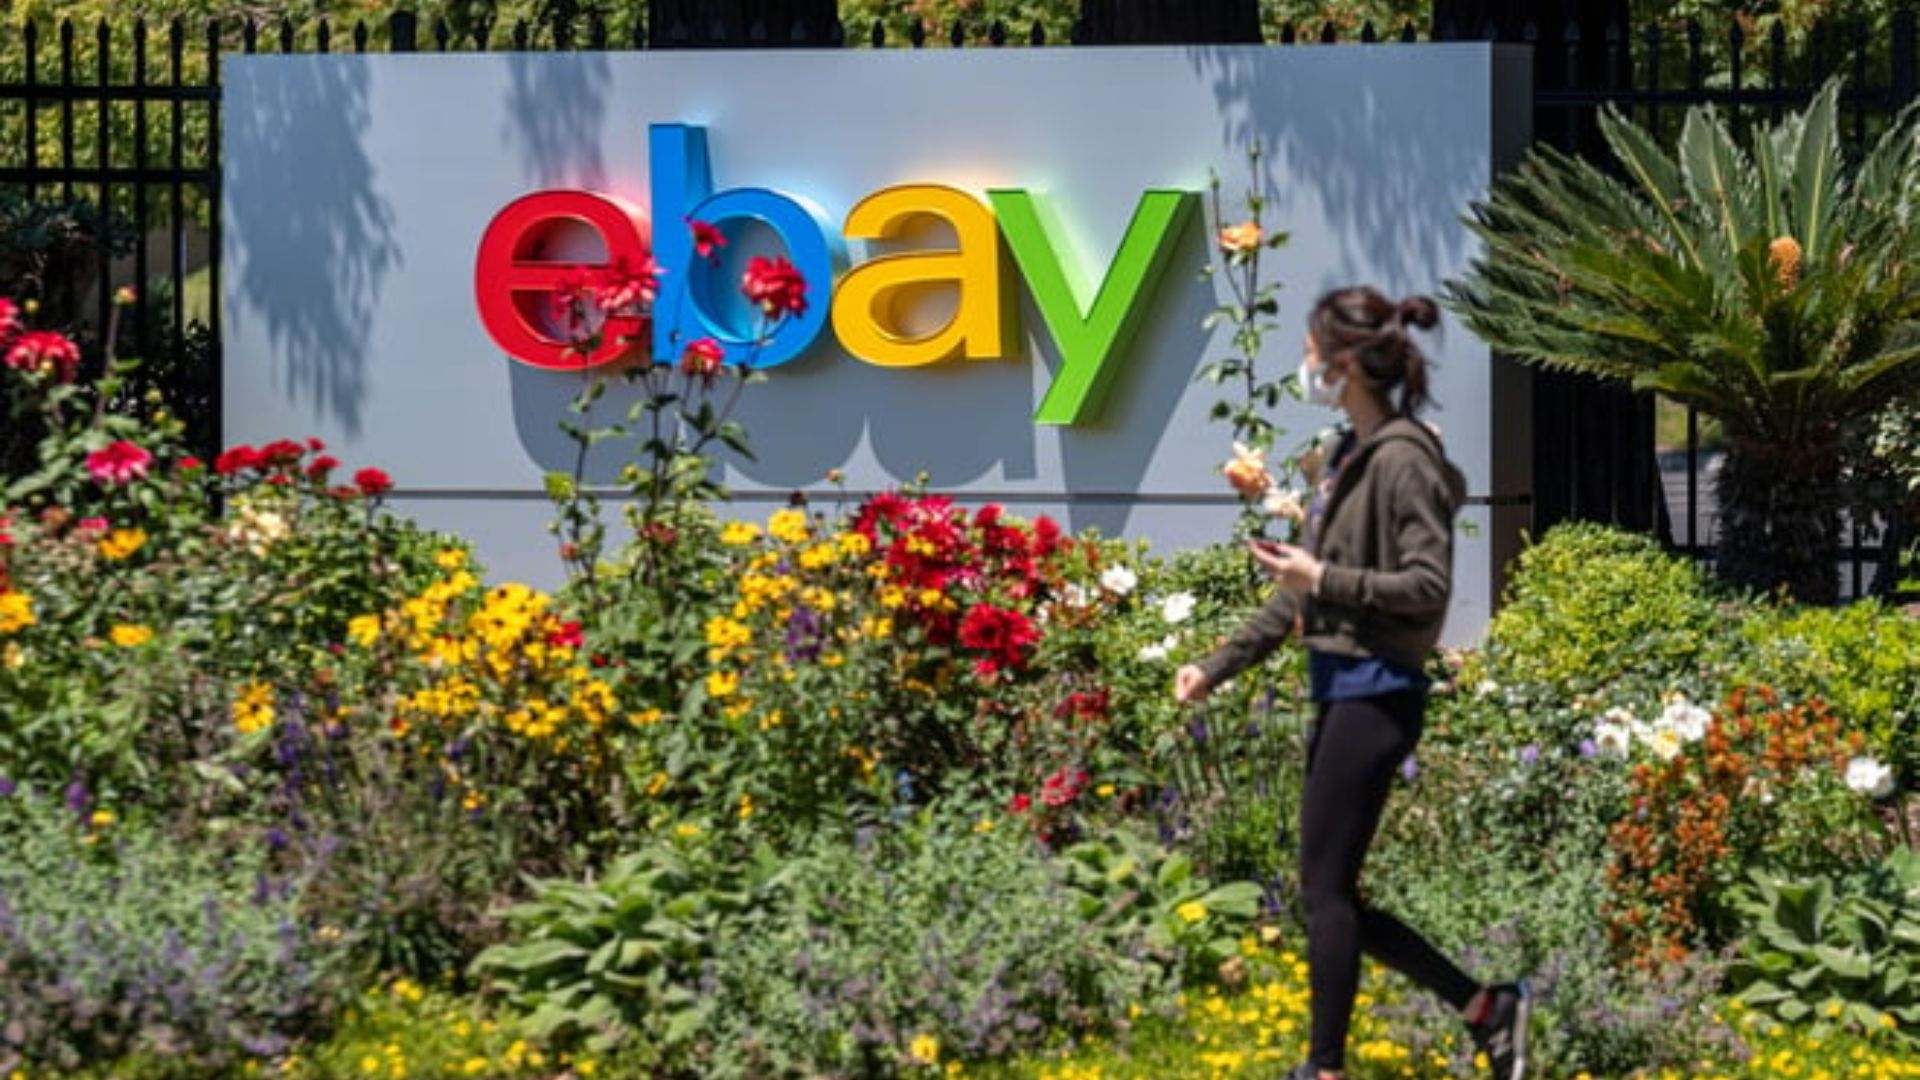 HOW EBAY IS USING AI TO RECOMMEND PRODUCTS AND IMPROVE CREATIVE